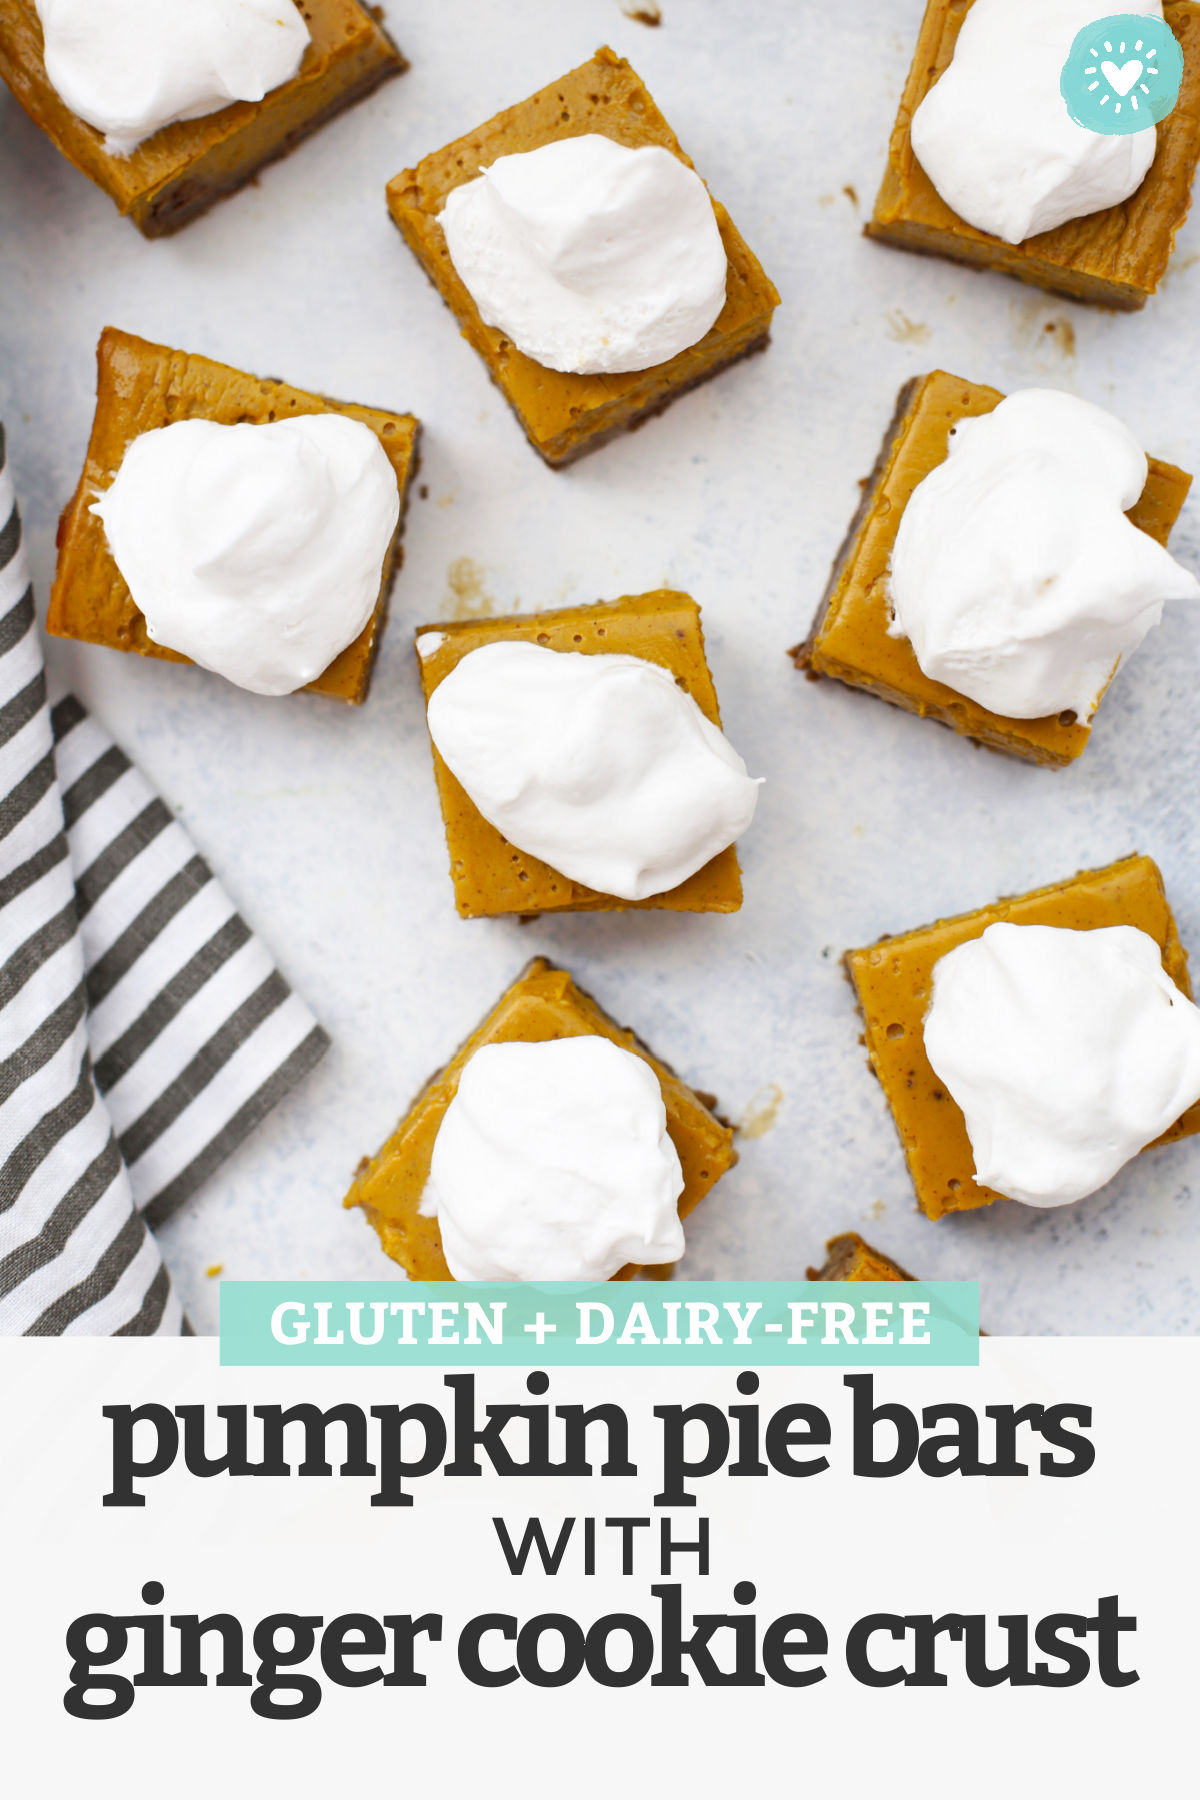 Gluten-Free Pumpkin Pie Bars with Ginger Cookie Crust – Swap out the pumpkin pie for these easy gluten-free pumpkin pie bars. The cookie crust makes them so easy! They slice and serve like a dream! Dairy-free pumpkin pie bars // Pumpkin Pie Bars recipe // Thanksgiving Dessert // Holiday Dessert // Fall Dessert